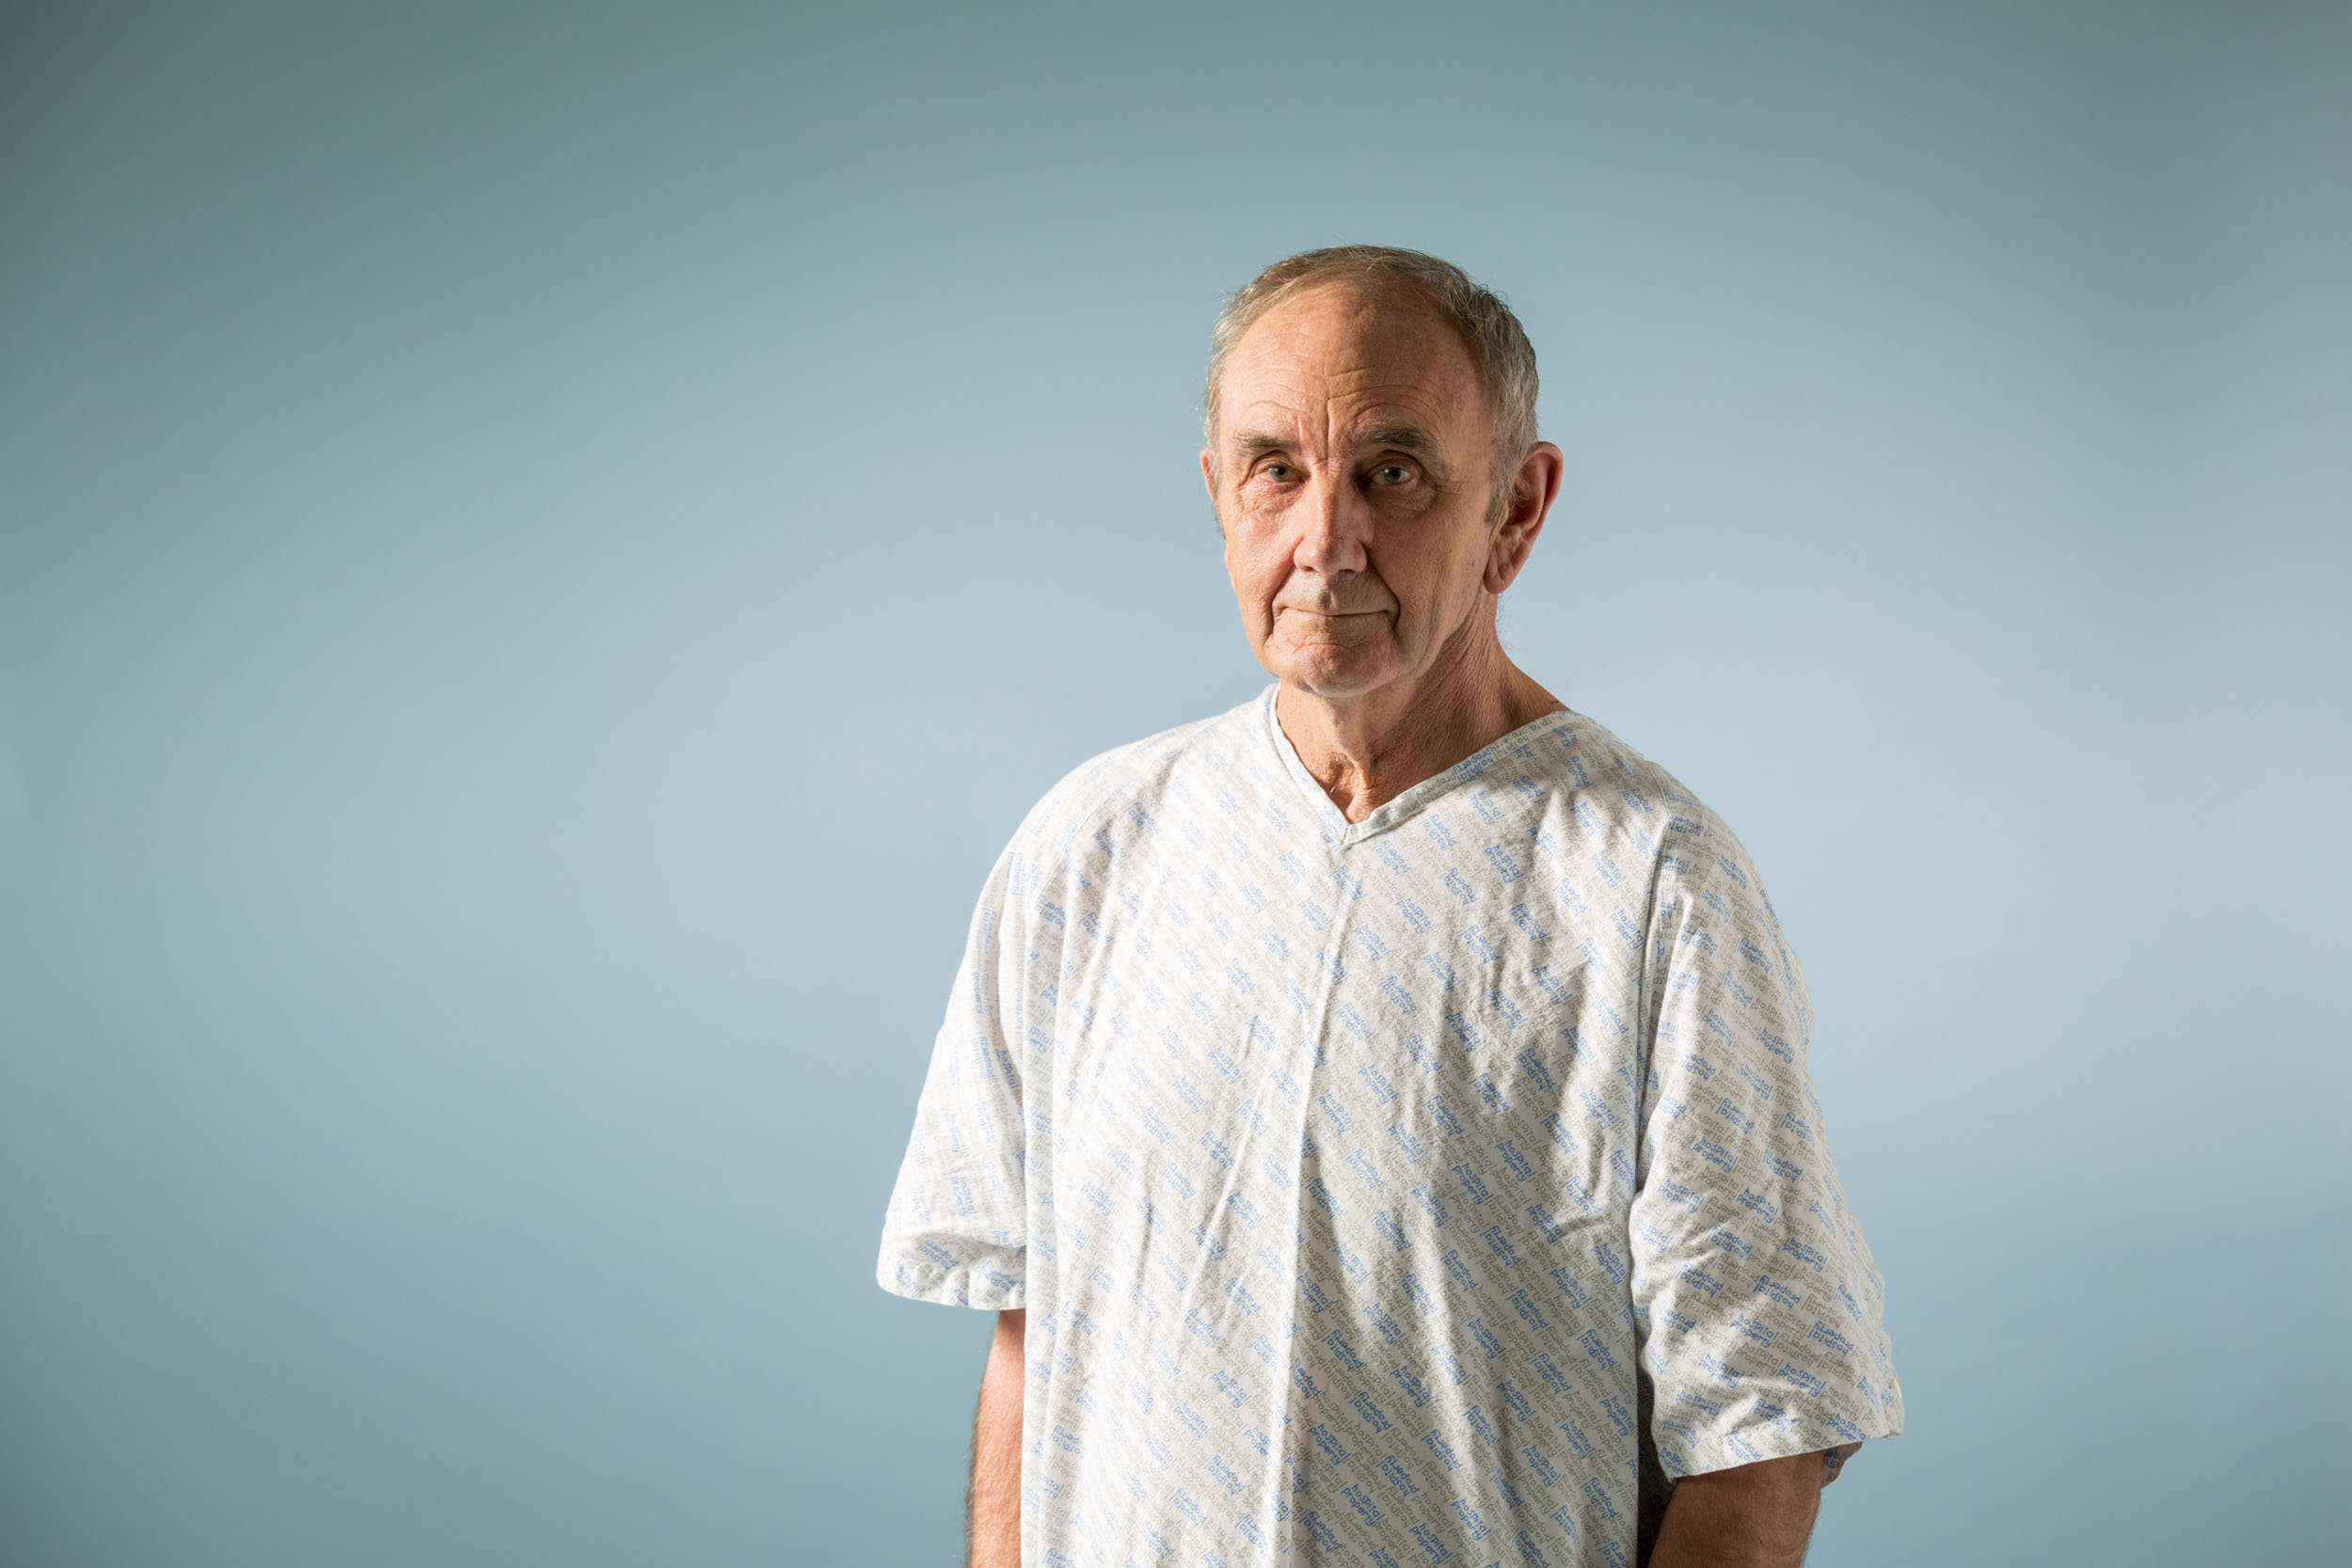 Maia brand photography of a Man in a hospital gown